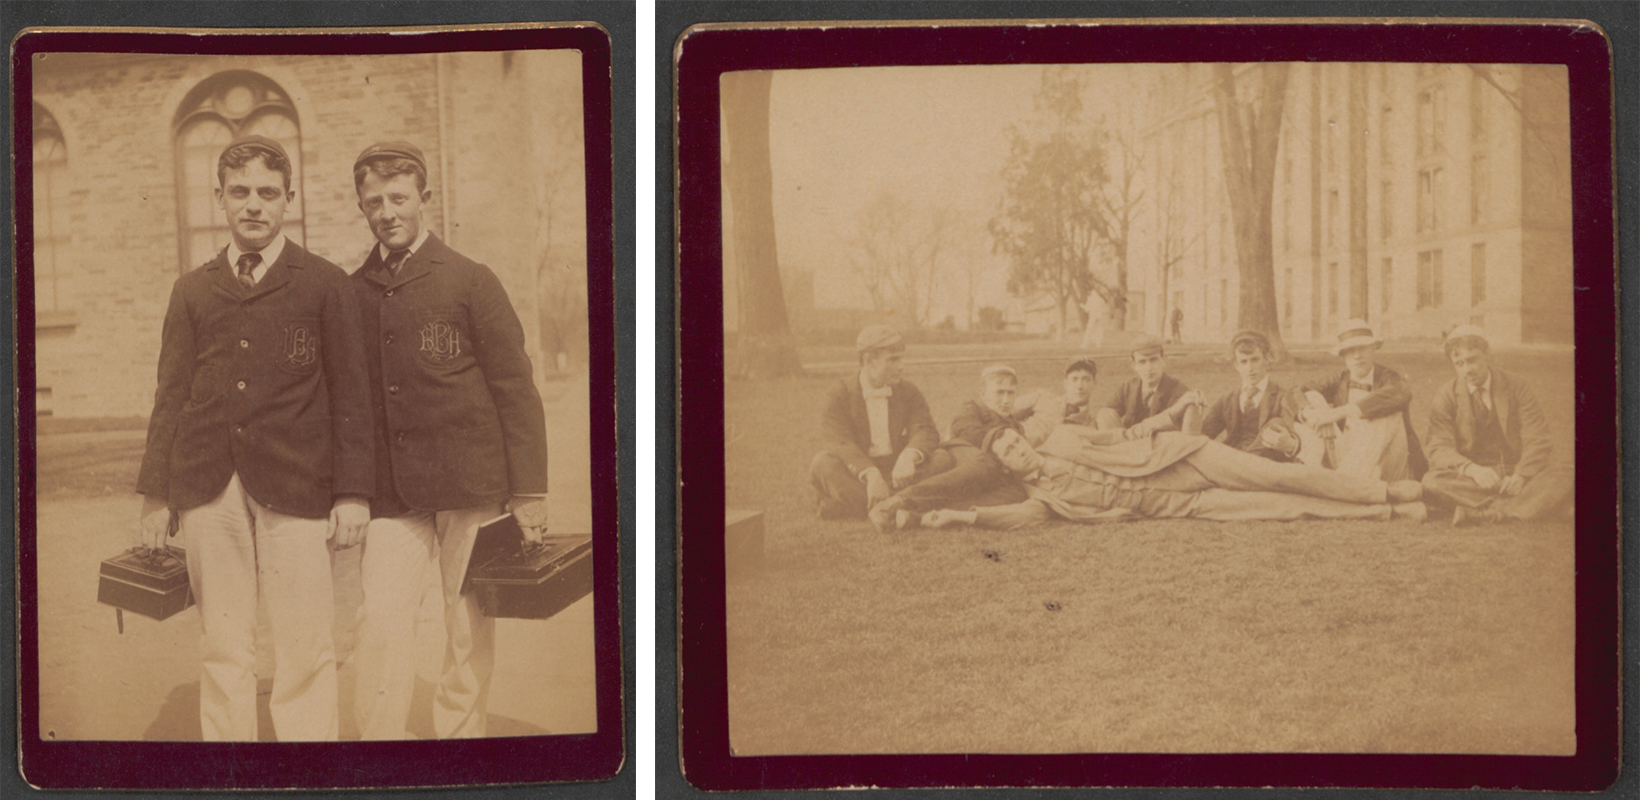 A composite image of two photographs. On the left is a photograph of two young men standing in front of a stone building with gothic windows. The two men are dress in dark jackets and light pants with shirts and neckties. They each hold a small square box and are looking directly at the camera. The right photoraph pictures seven young met sitting on a lawn with one additional man lying on his side in front of them. They are all dress in three-piece suits, and all are looking directly at the camera except for one, who looks at the man lying. Pictured in the distance is a large, collegiate-looking building and a number of tall trees.